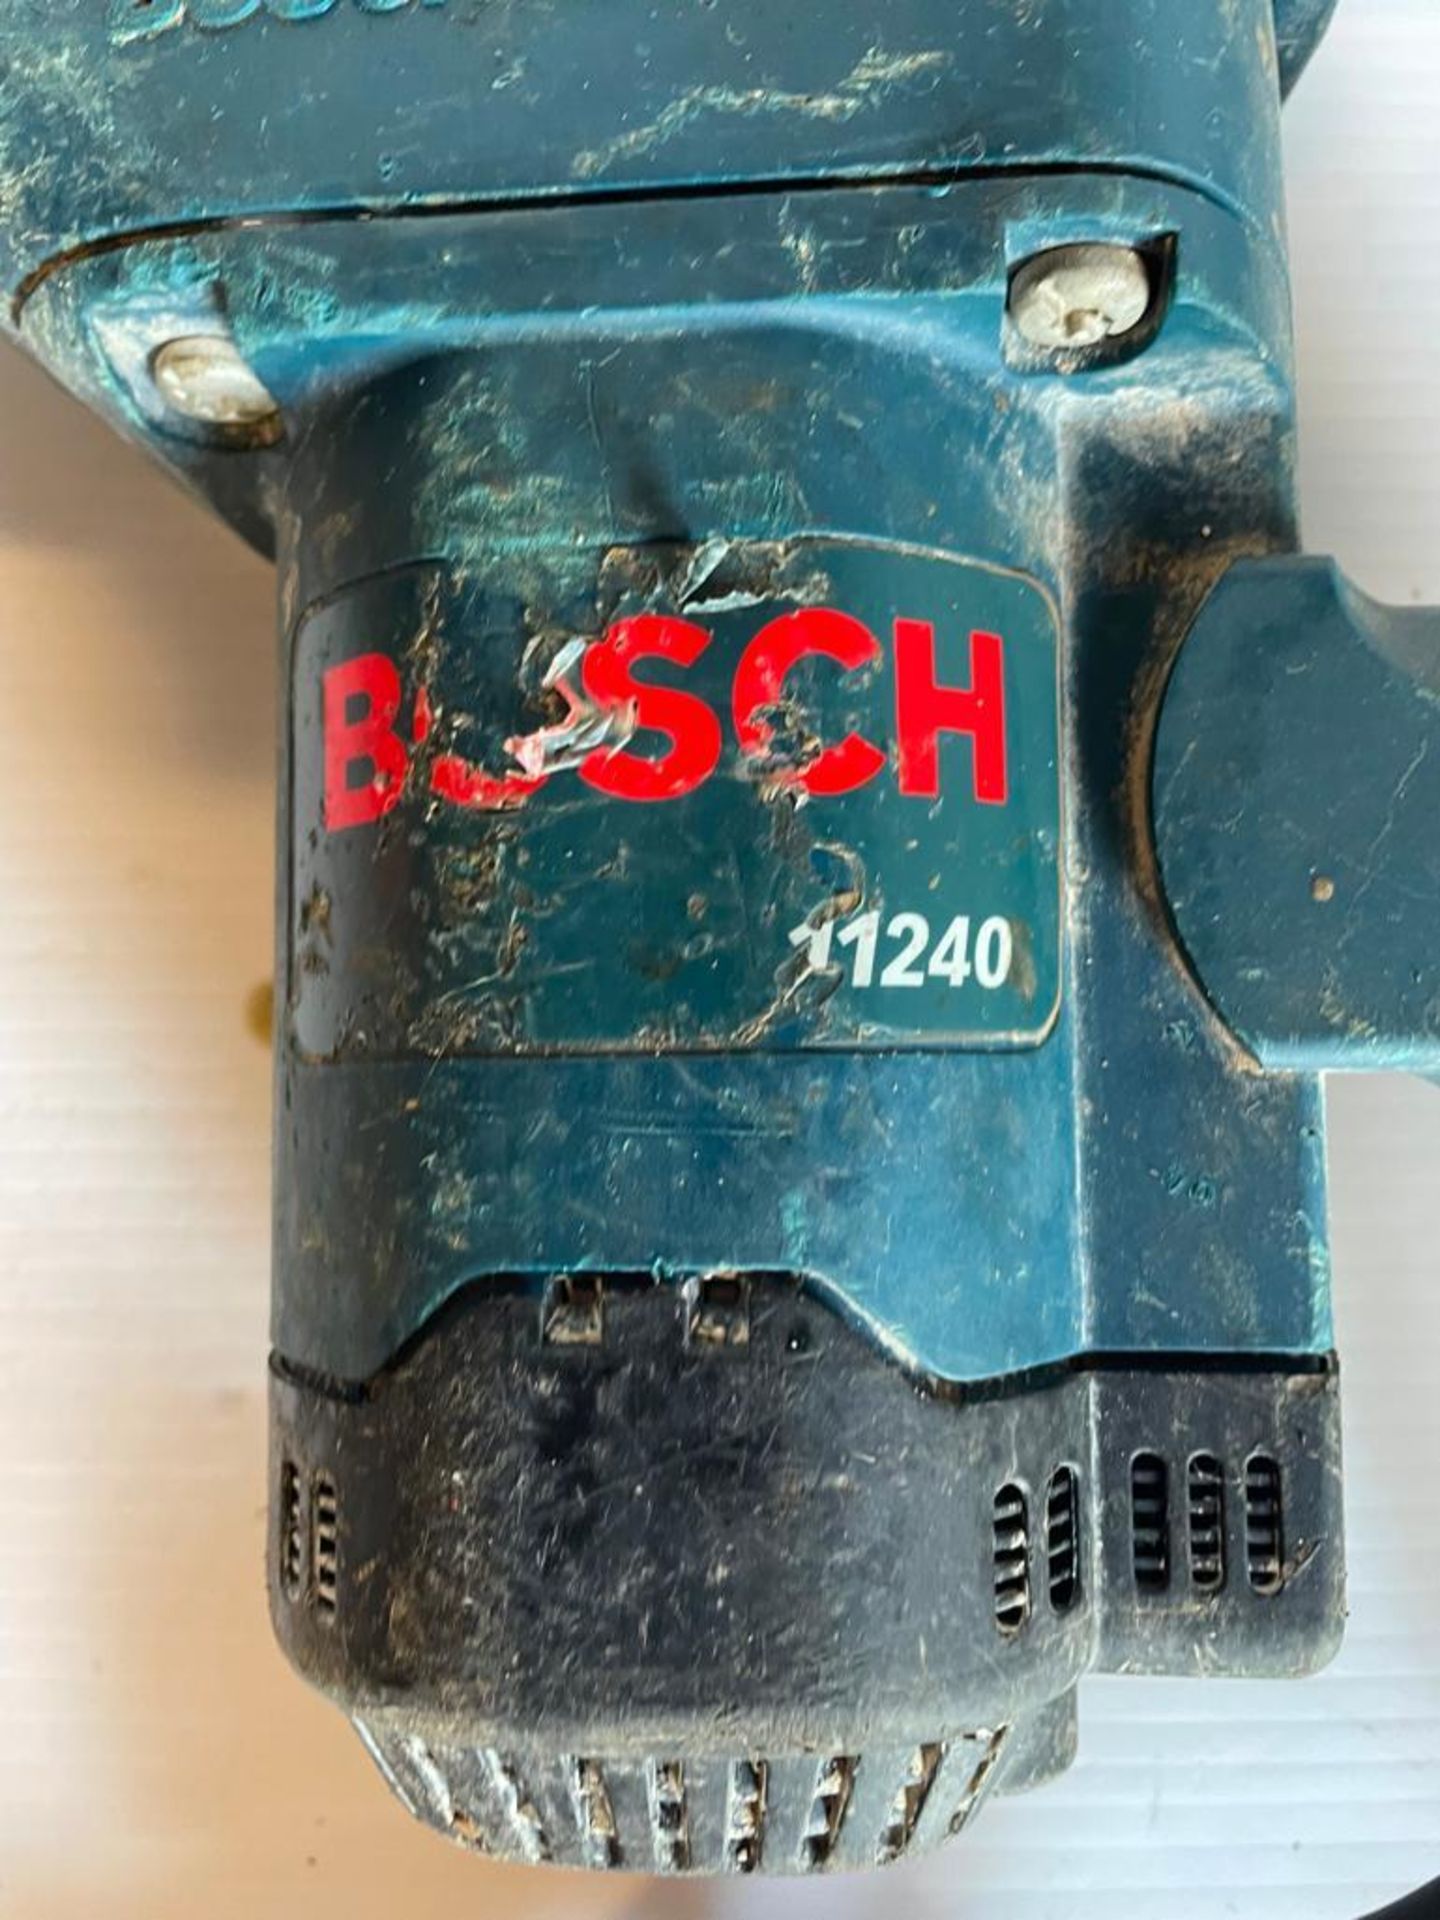 Bosch 11240 Hammer Drill, 120V. Located in Hazelwood, MO - Image 3 of 6